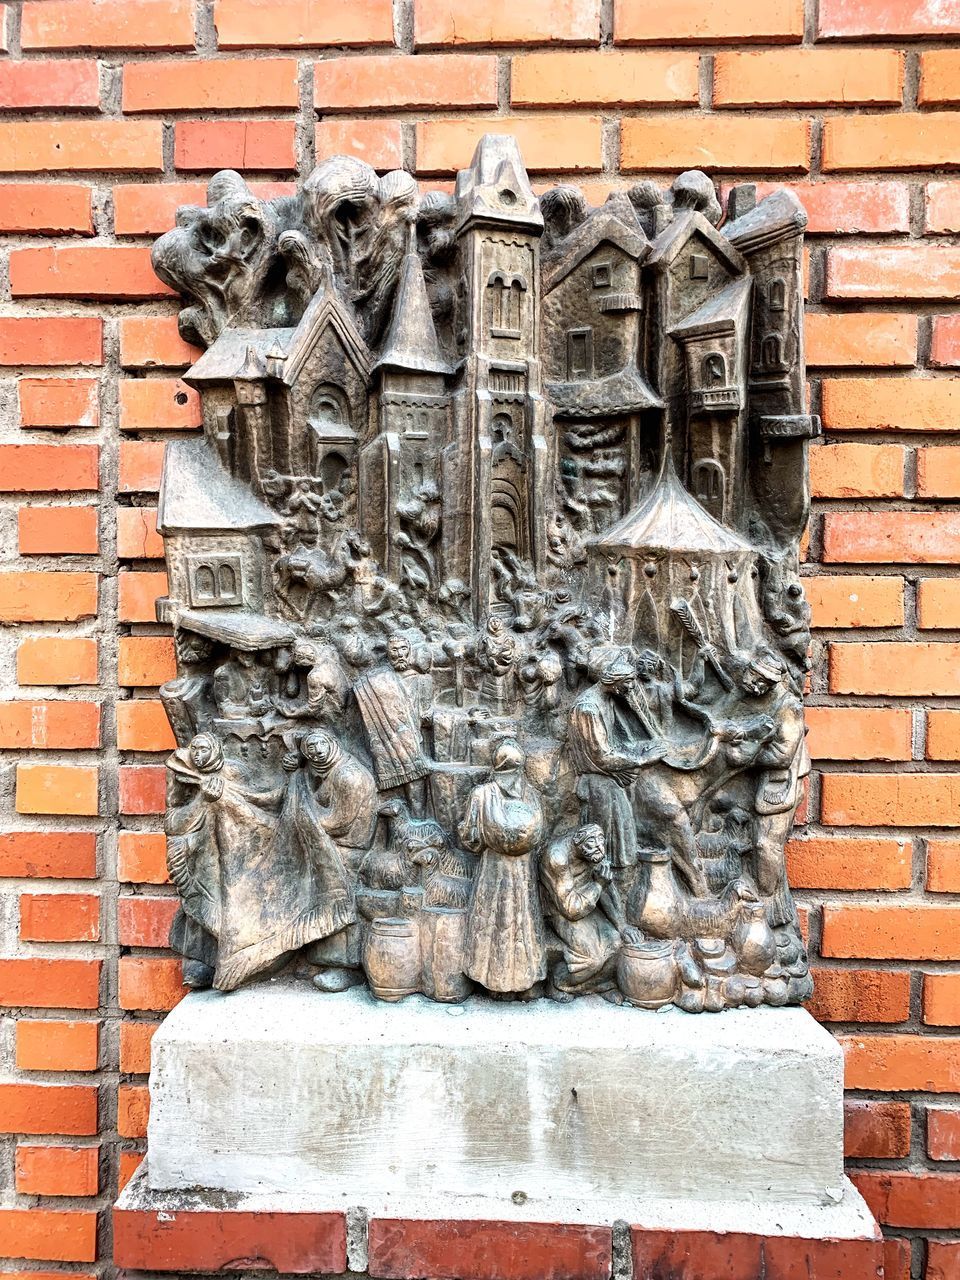 CLOSE-UP OF STATUES ON WALL